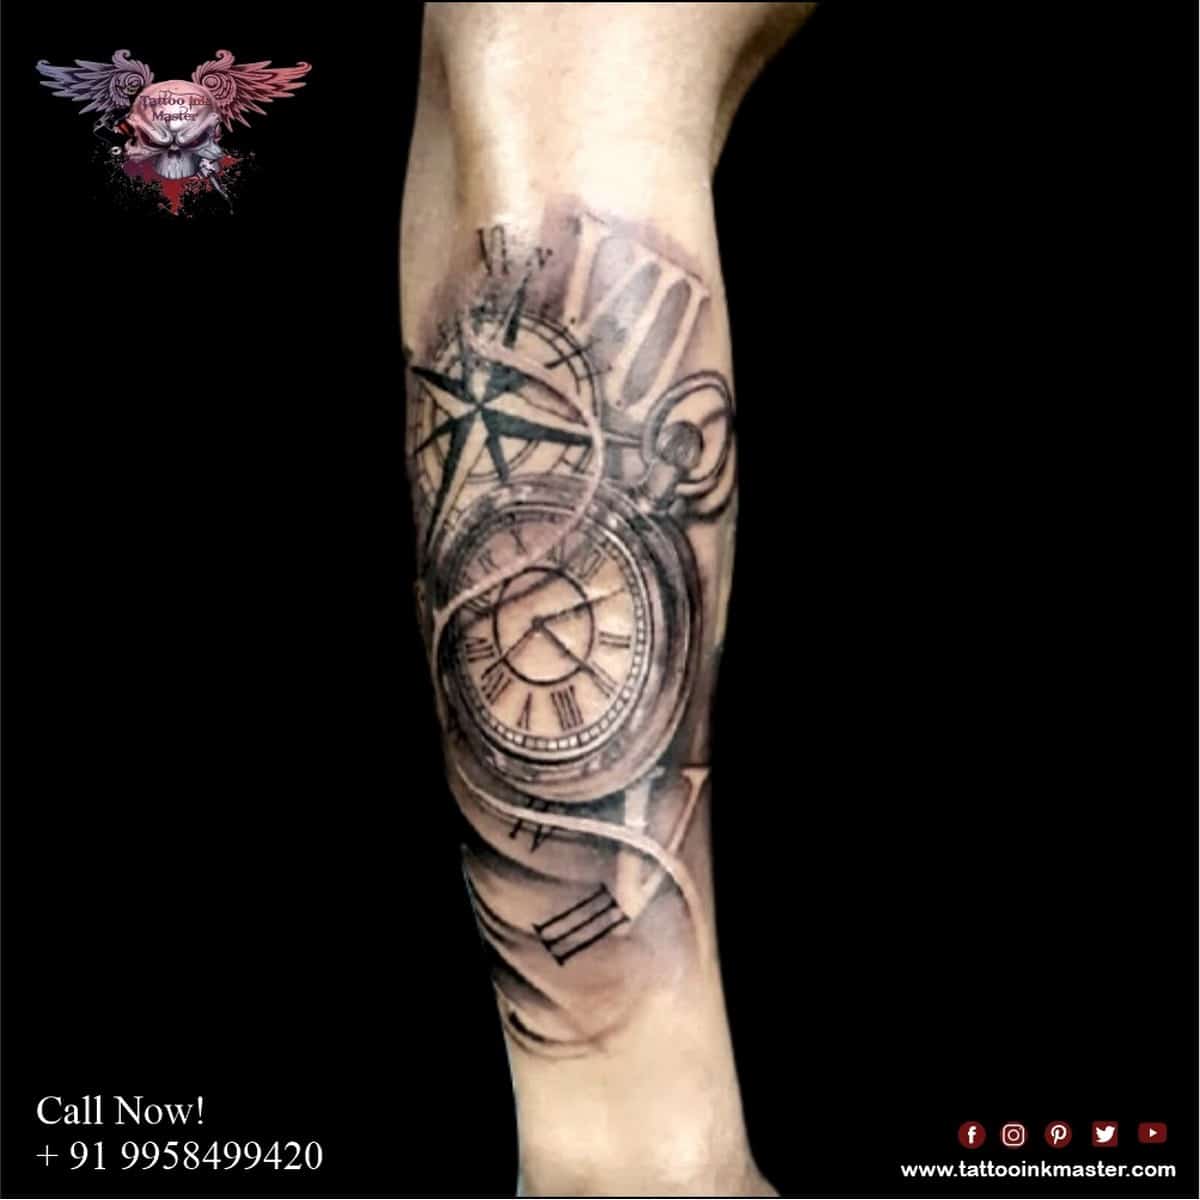 7 Super-cool Tattoo Ideas for Your Growing Teens - Numbskin Cream